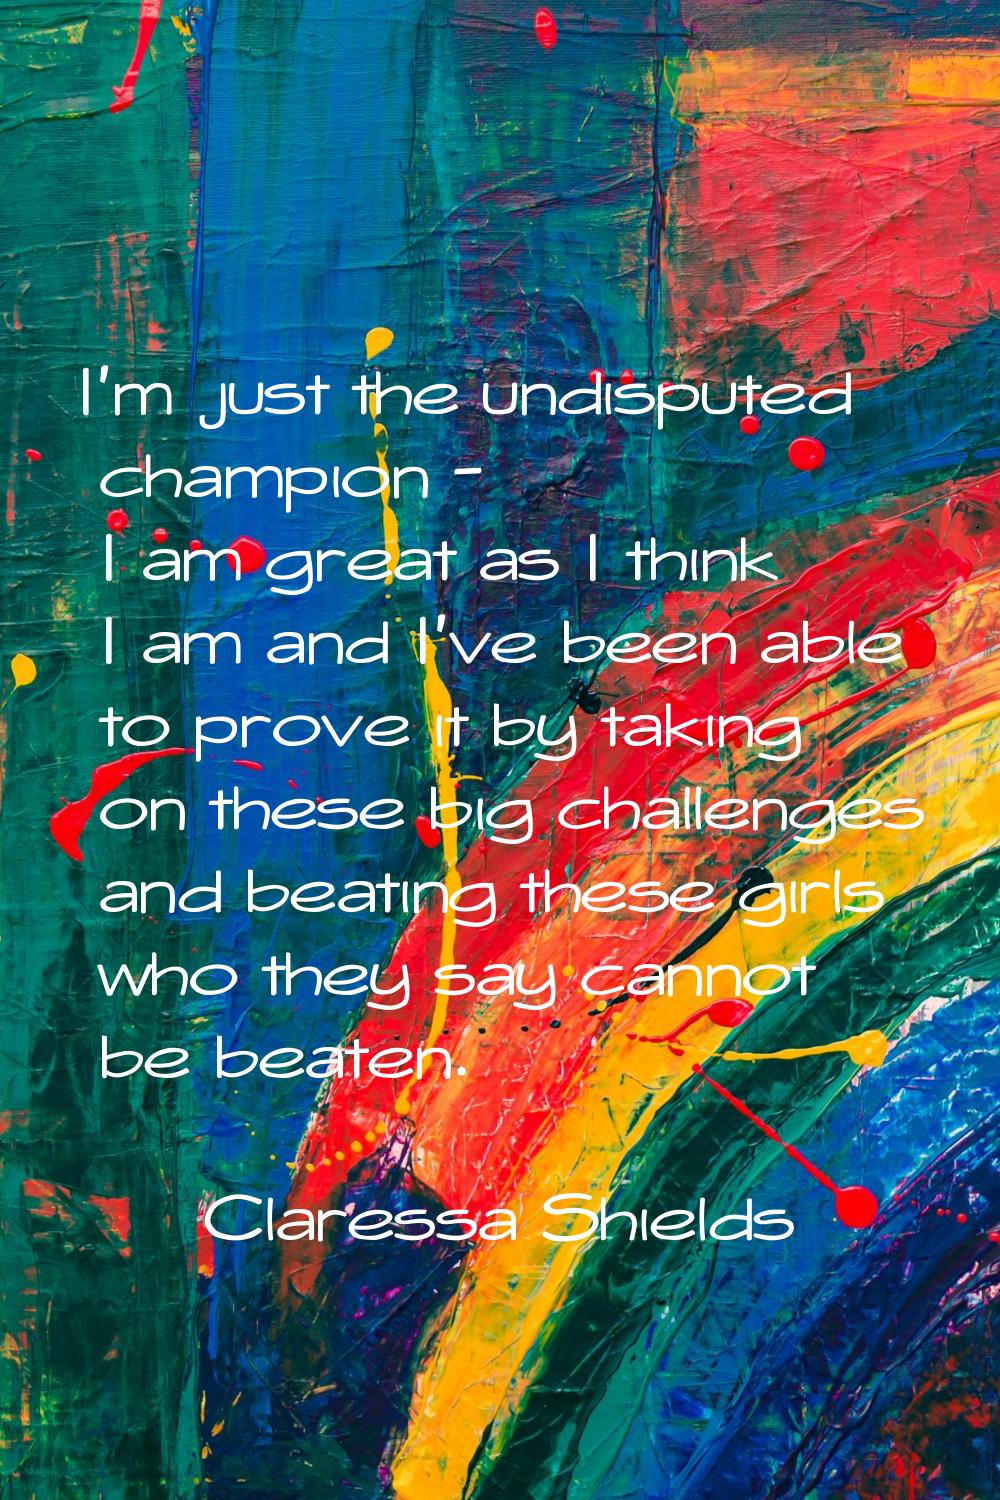 I'm just the undisputed champion - I am great as I think I am and I've been able to prove it by tak